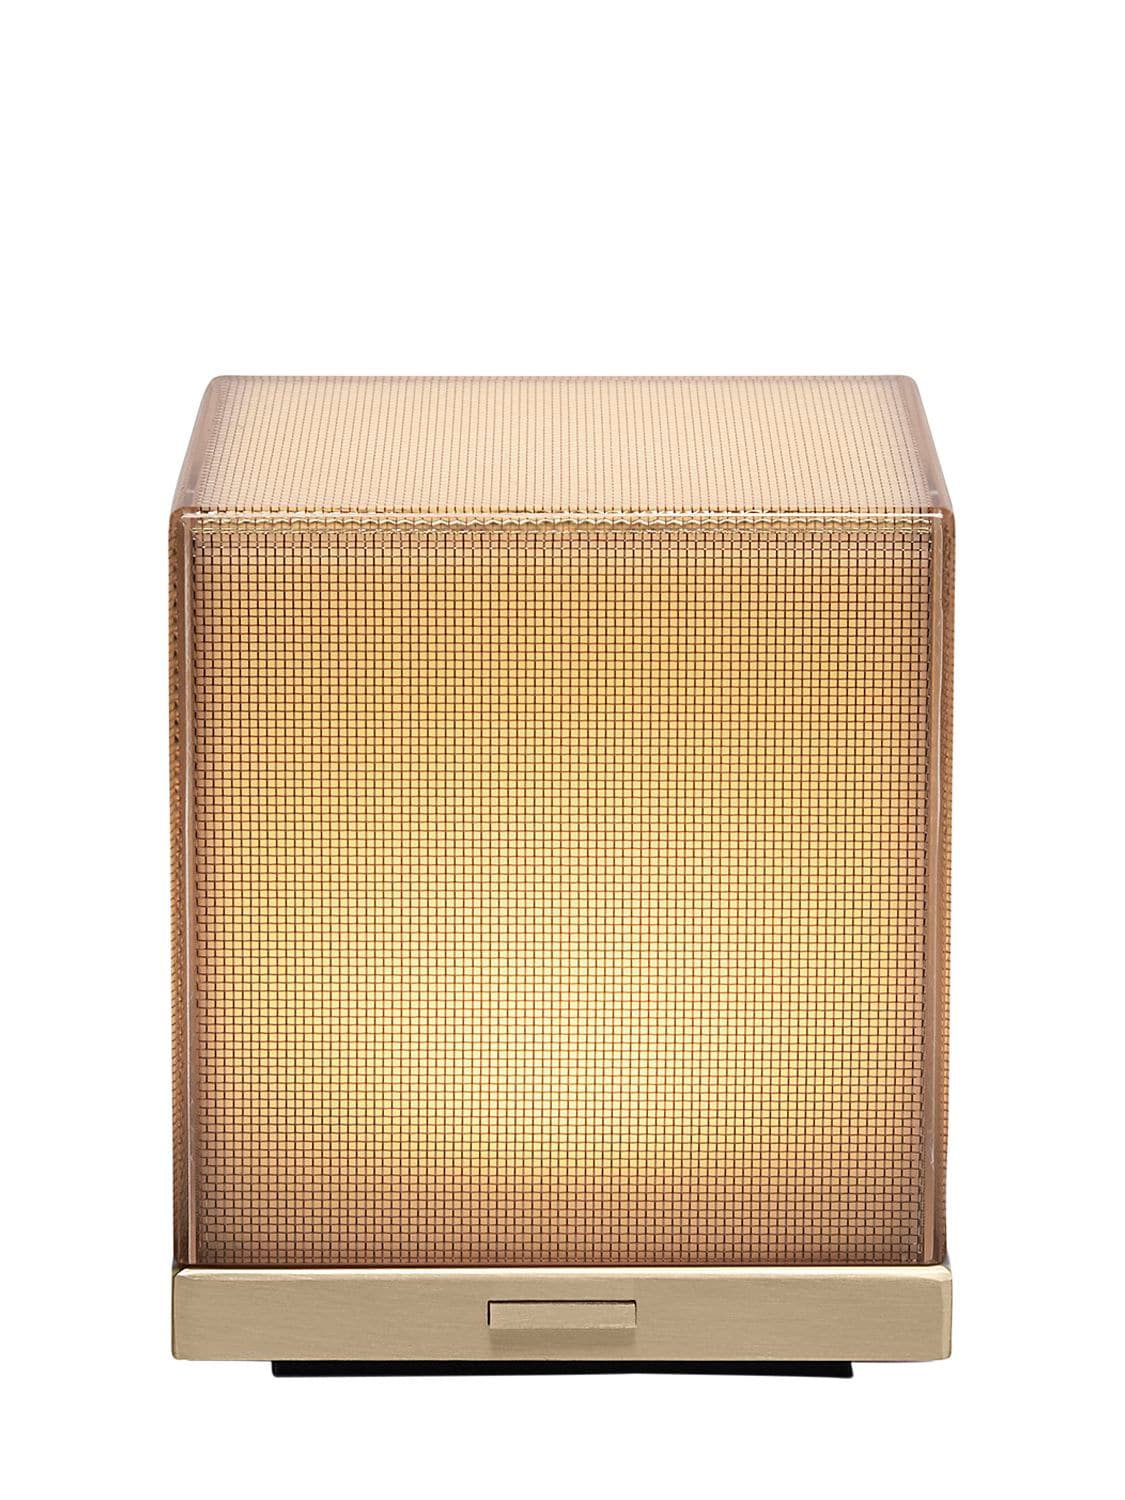 Armani/casa oz Rechargeable Table Lamp In Gold